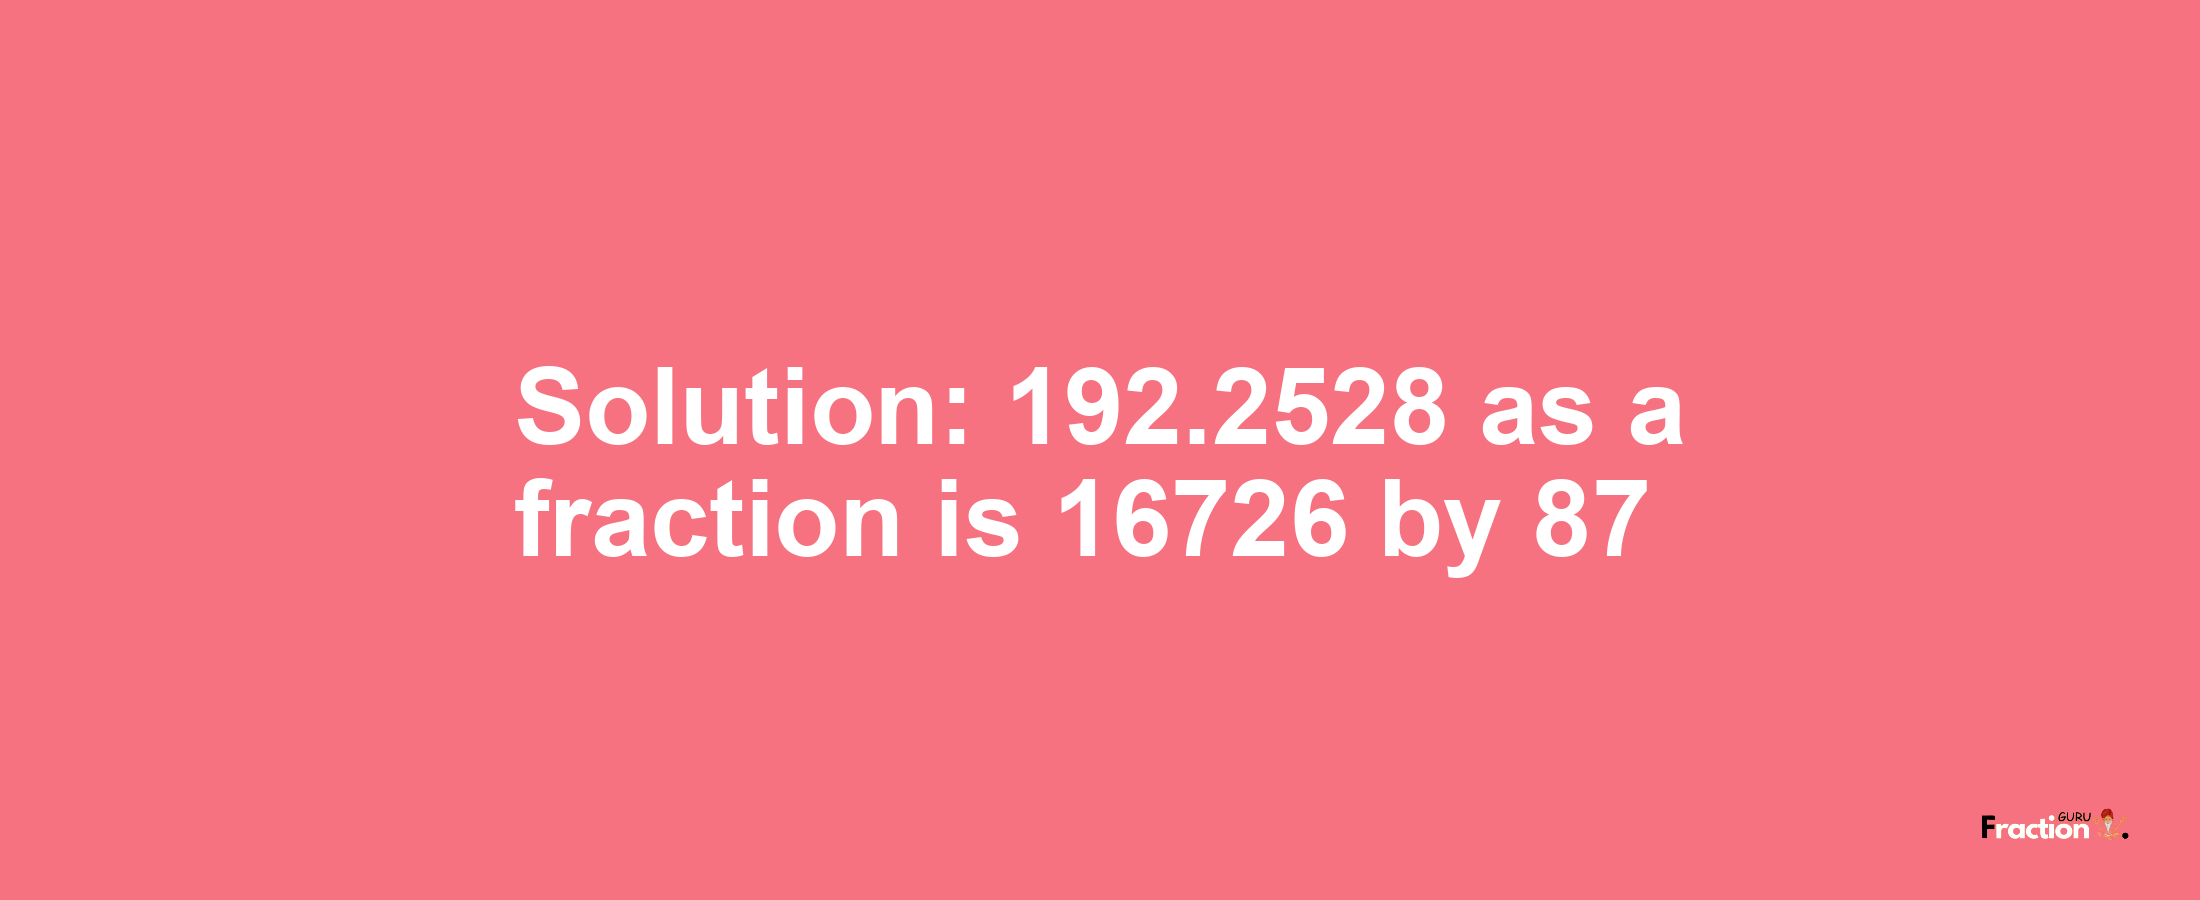 Solution:192.2528 as a fraction is 16726/87